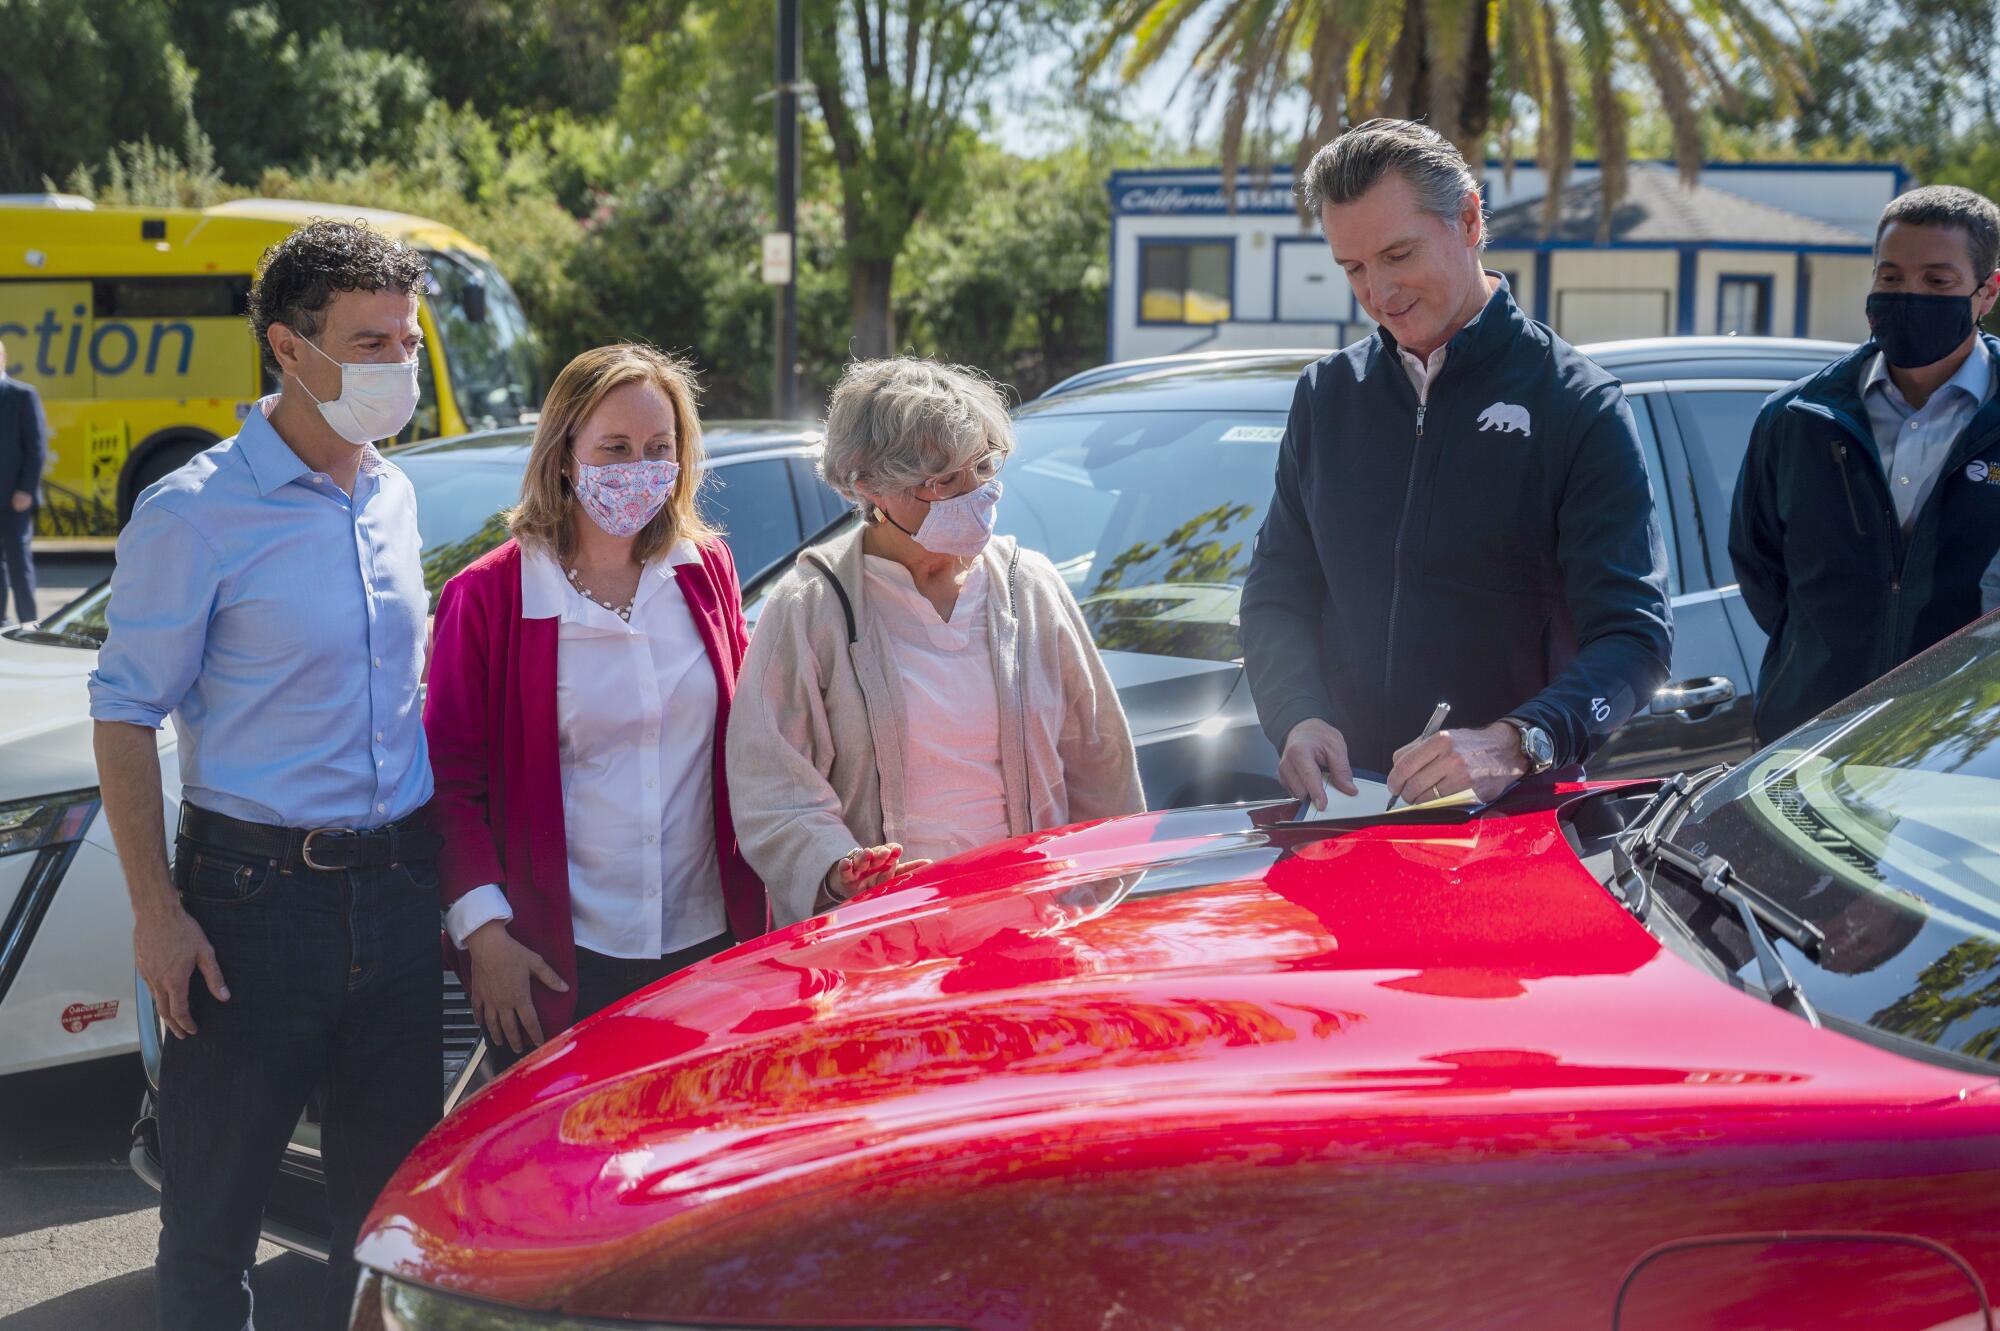 California Gov. Gavin Newsom signs a document on the hood of a shiny red car before onlookers.